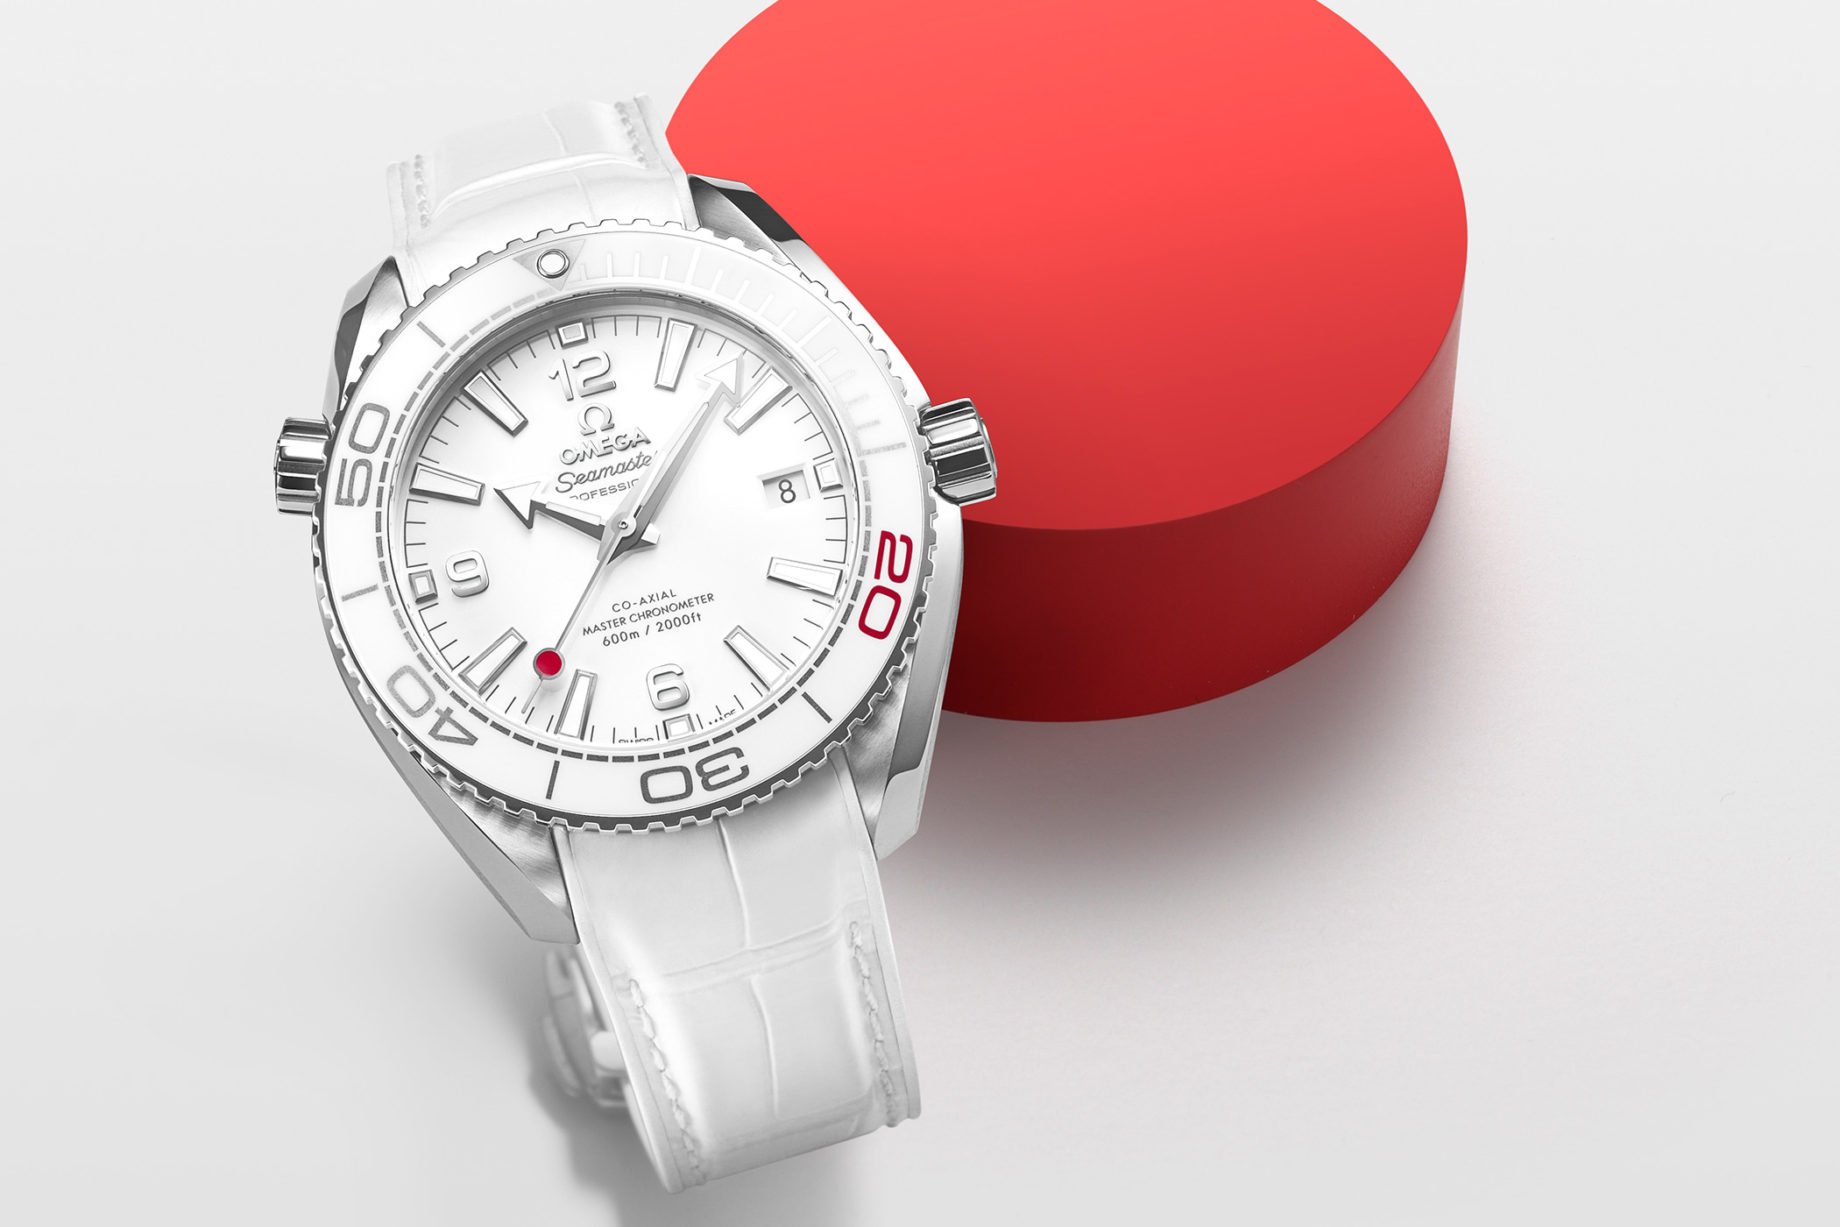 Omega Seamaster Planet Ocean Tokyo 2020 Limited Edition